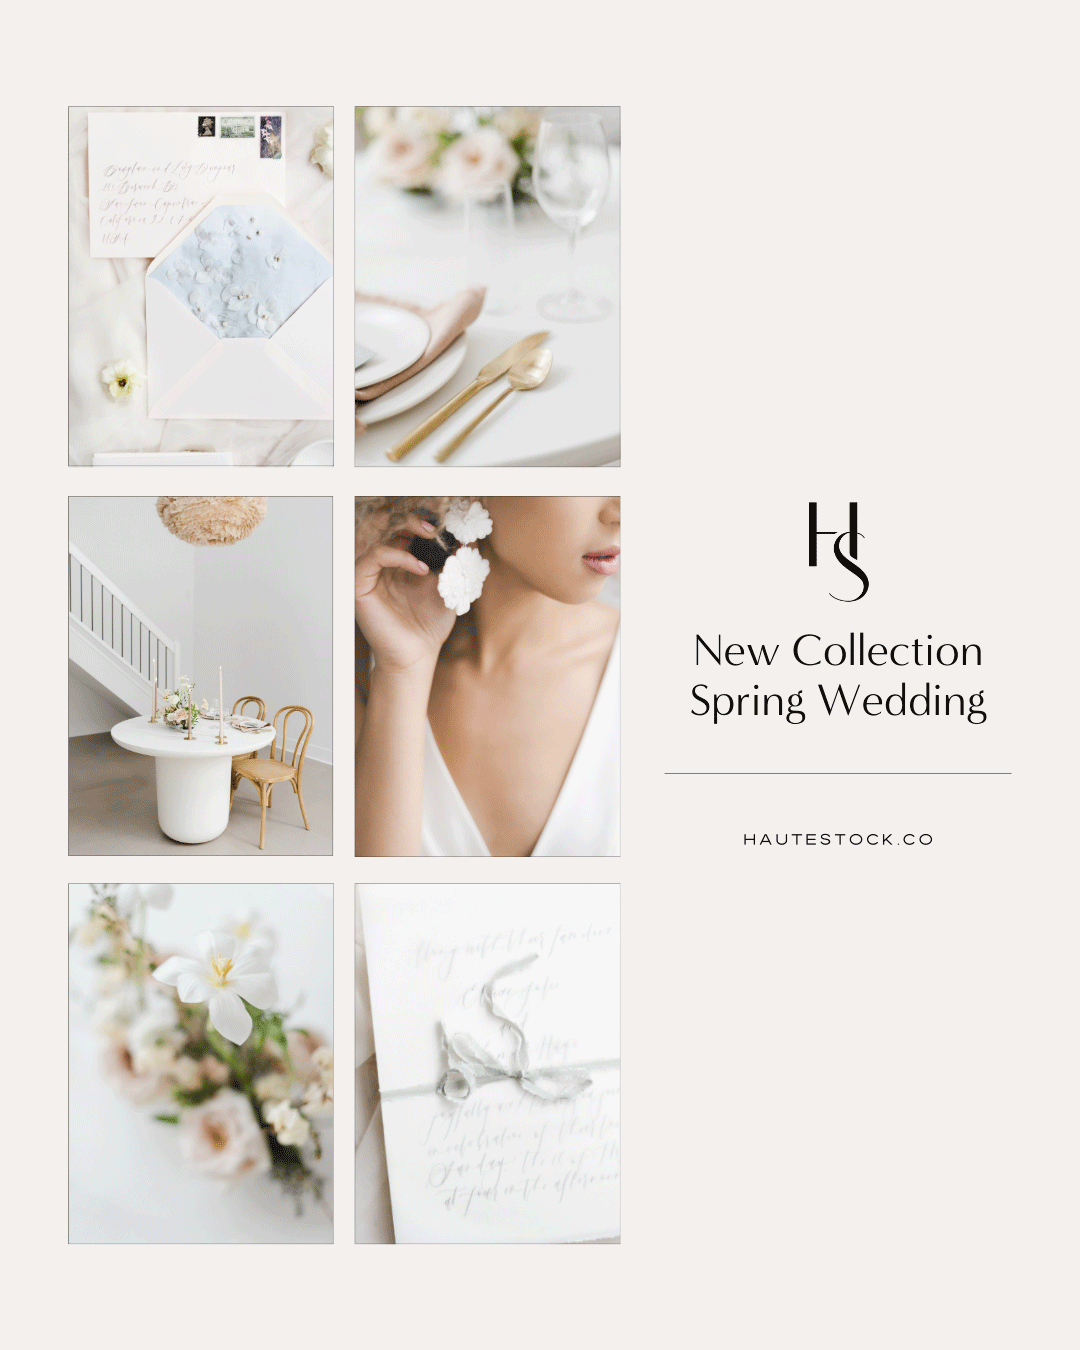 Spring wedding imagery featuring delicate tablescapes, floral arrangements and stationery mockups.